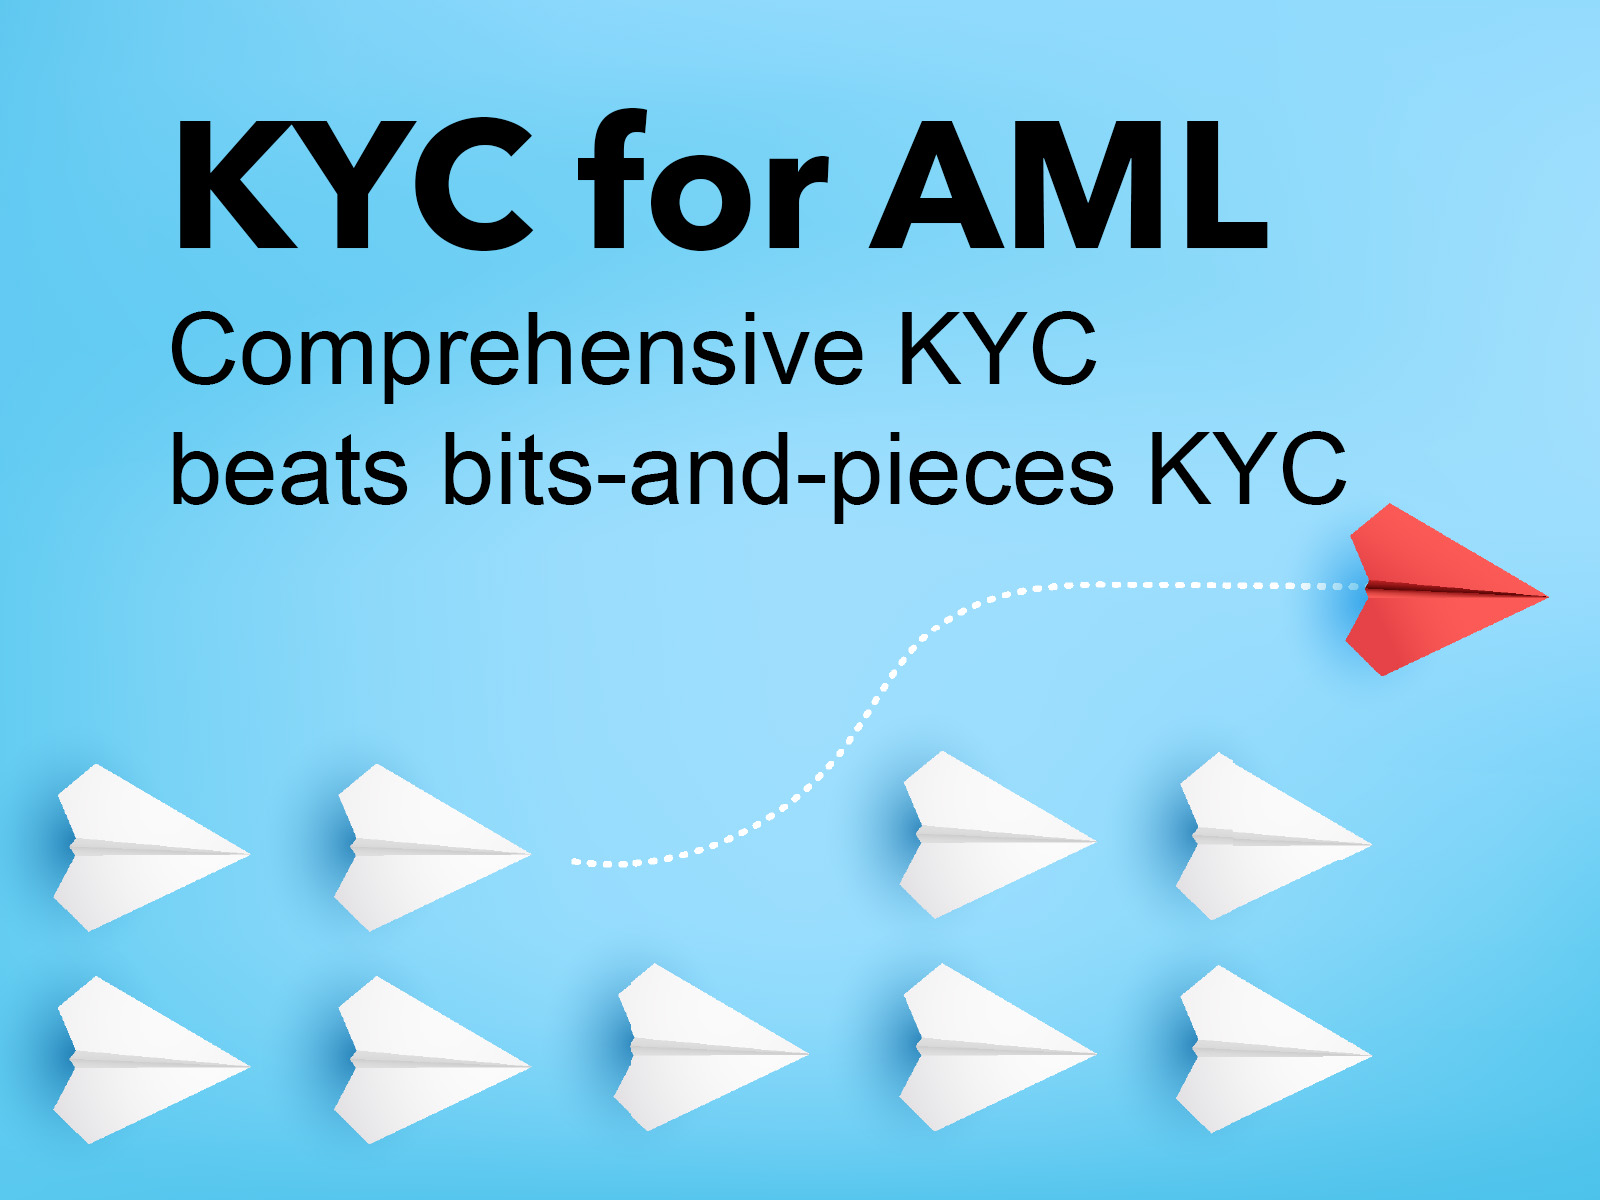 Art shows blue field on which there is black text, and two rows of paper airplanes with one red paper airplane leaving the formation to fly its own route ahead of the others. This illustrates a story about comprehensive KYC for AML Compliance. KYC software for AML should have comprehensive features--not half-baked KYC.